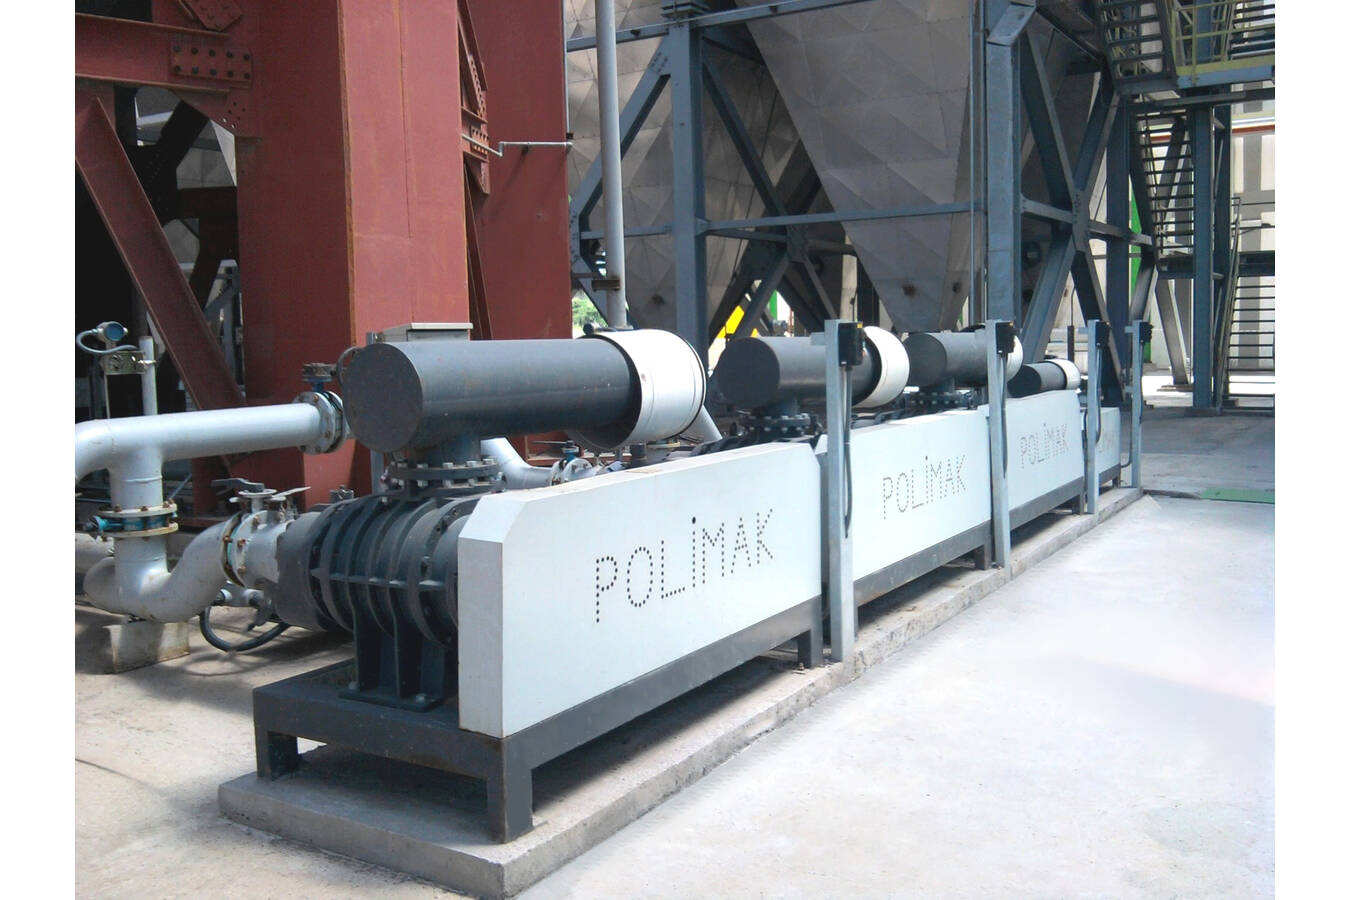 Roots Blowers for fly ash handling in power plant